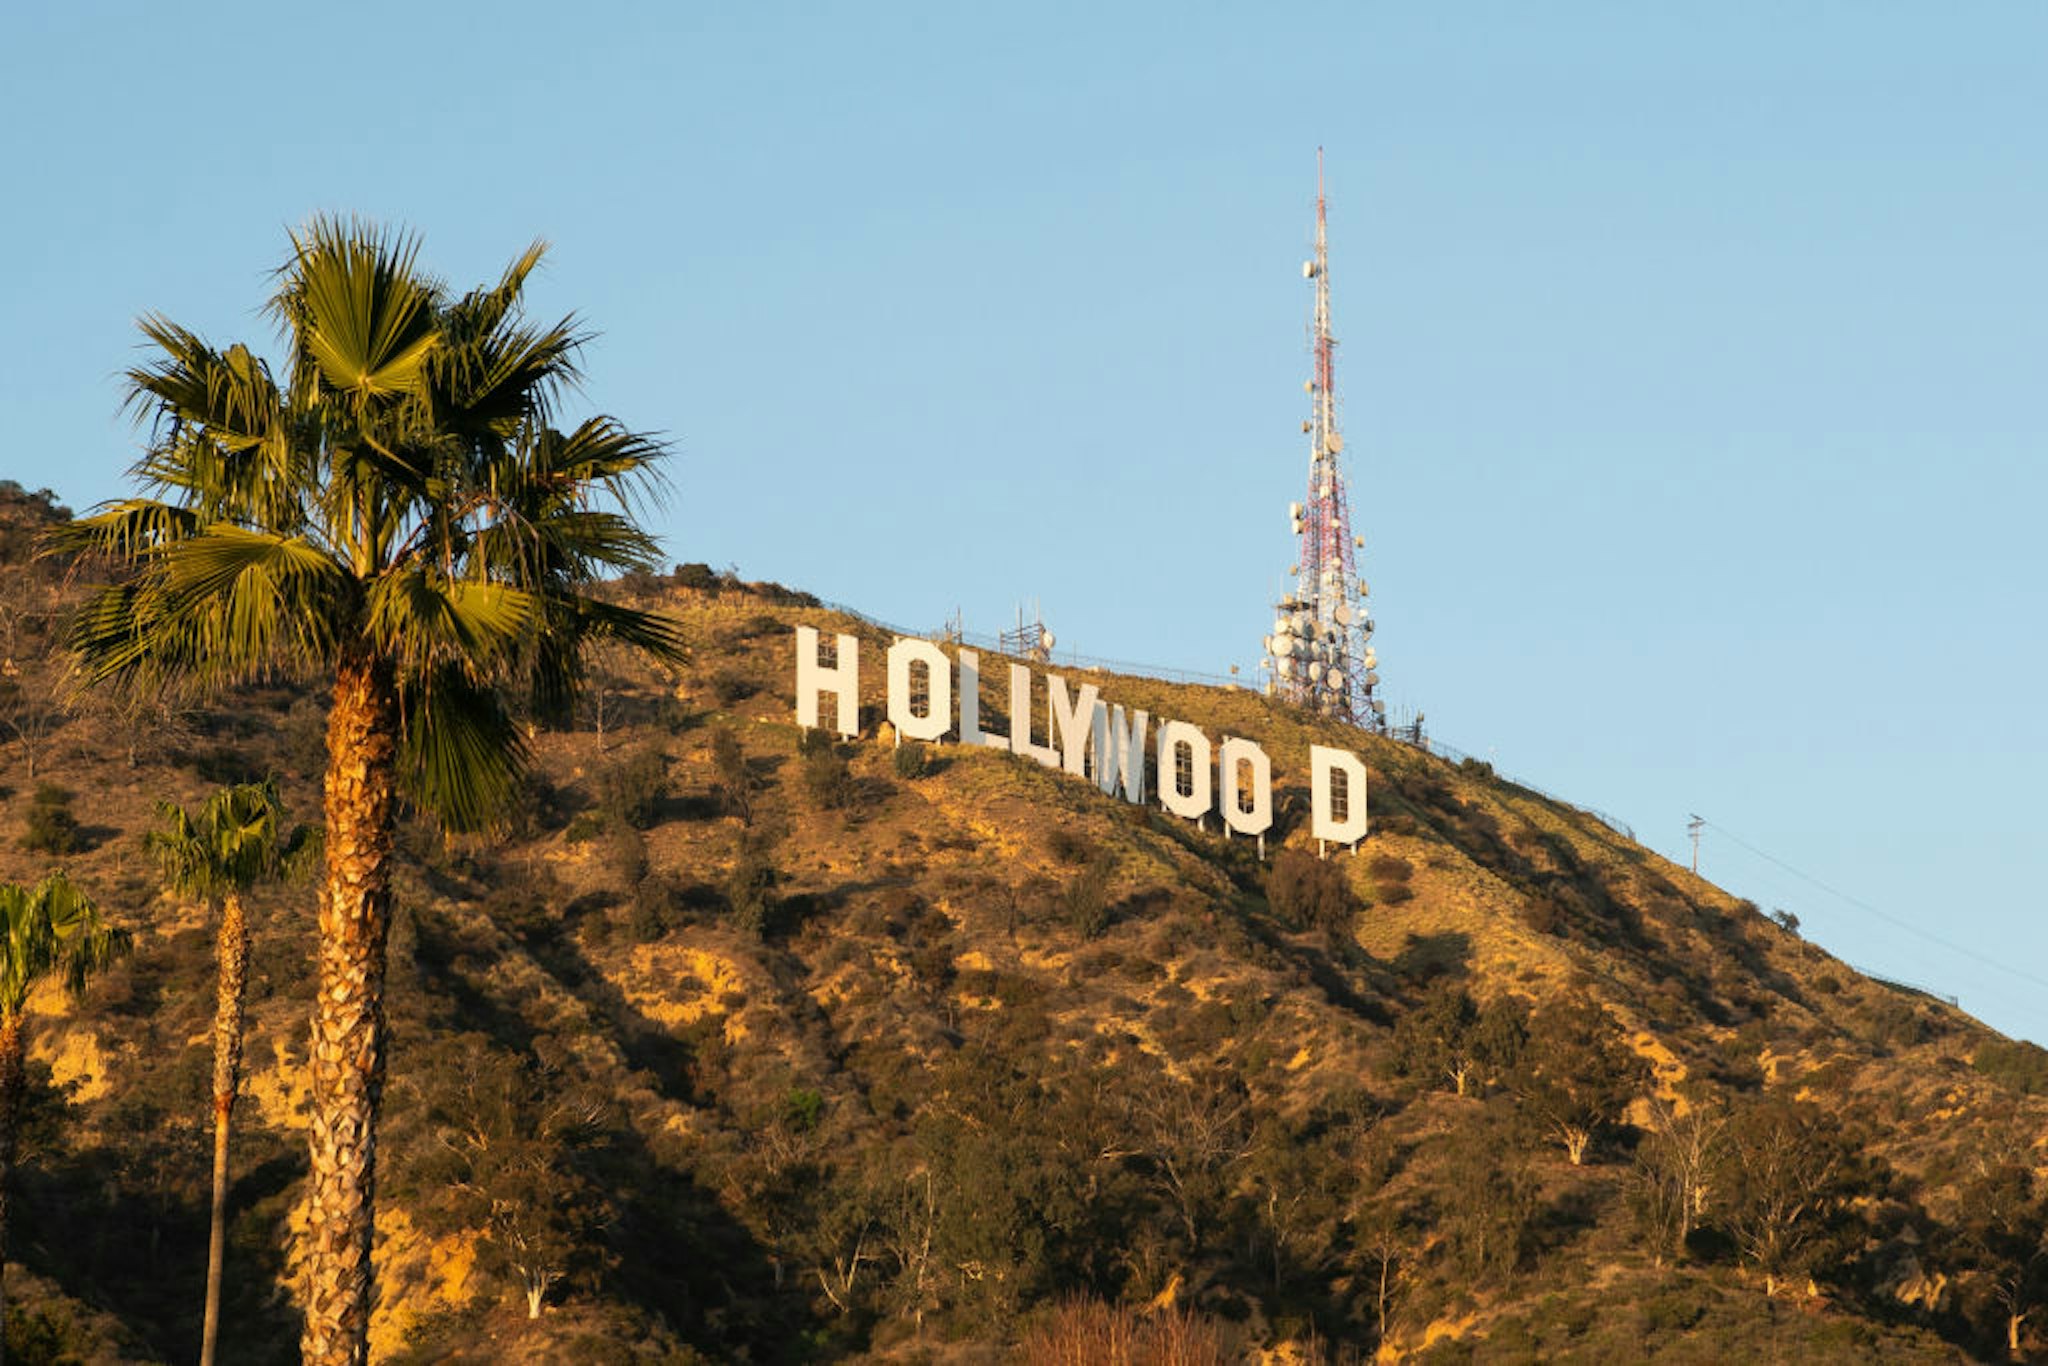 A view of the Hollywood Sign on Mount Lee on March 18, 2020 in Los Angeles, California.